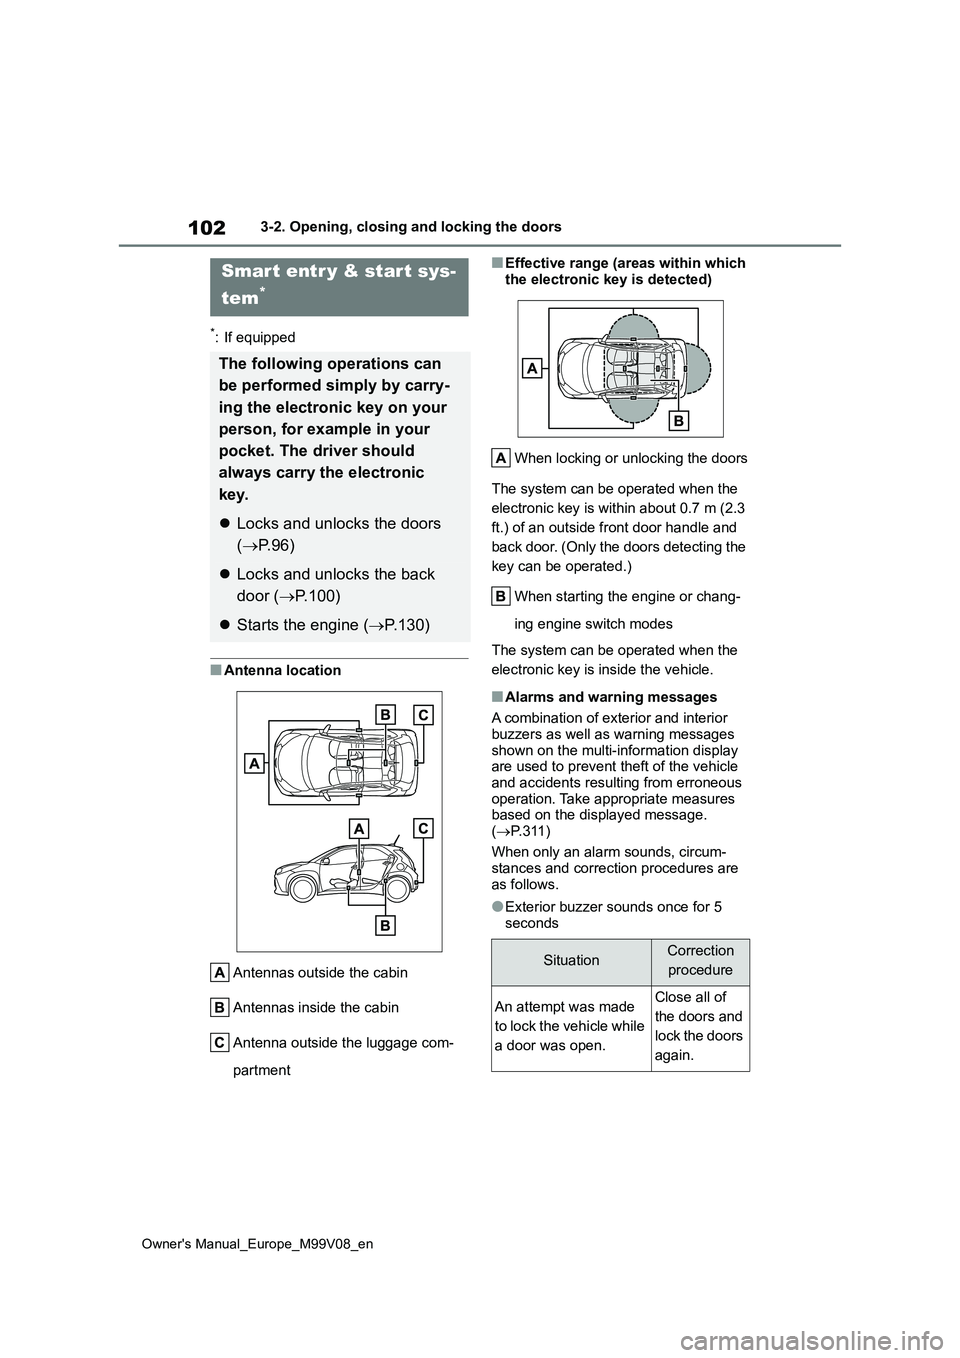 TOYOTA AYGO X 2022  Owners Manual (in English) 102
Owner's Manual_Europe_M99V08_en
3-2. Opening, closing and locking the doors
*: If equipped
■Antenna location 
Antennas outside the cabin 
Antennas inside the cabin
Antenna outside the luggag